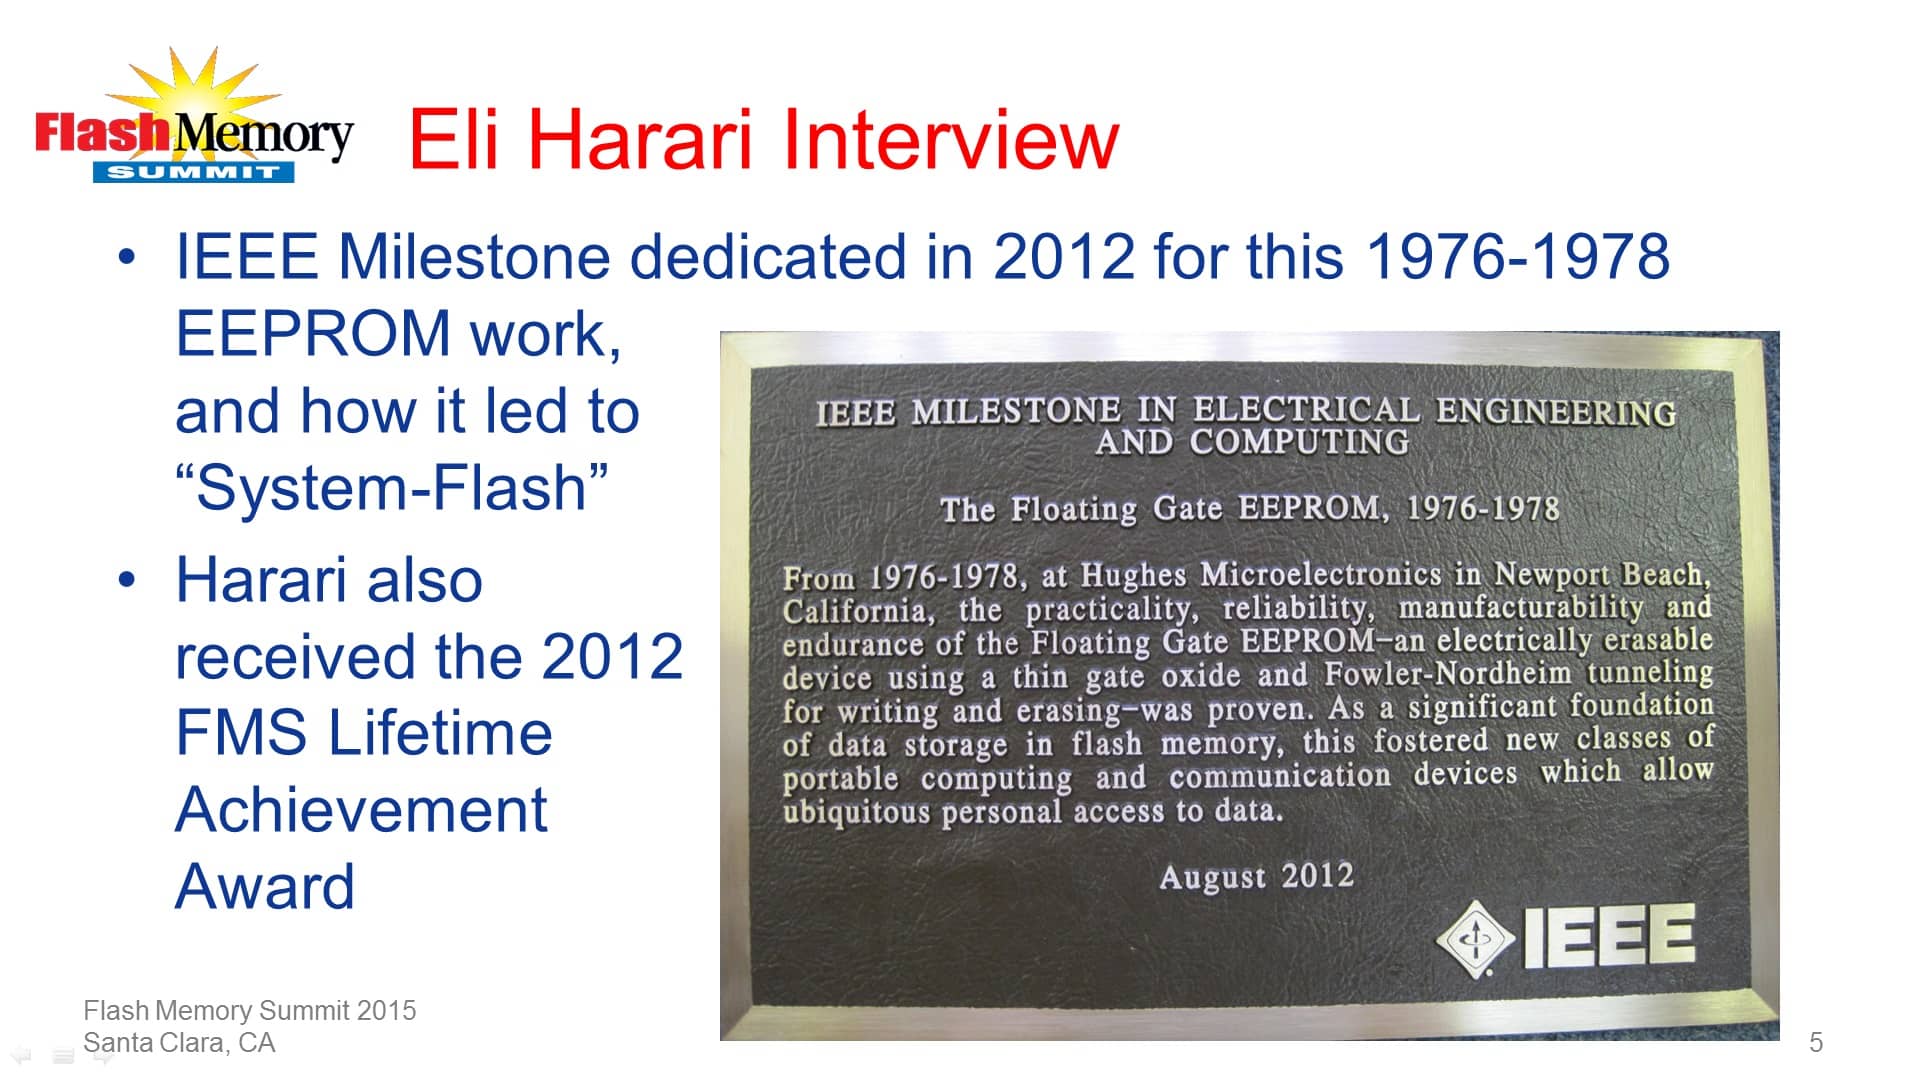 Significance of the IEEE Milestone Award